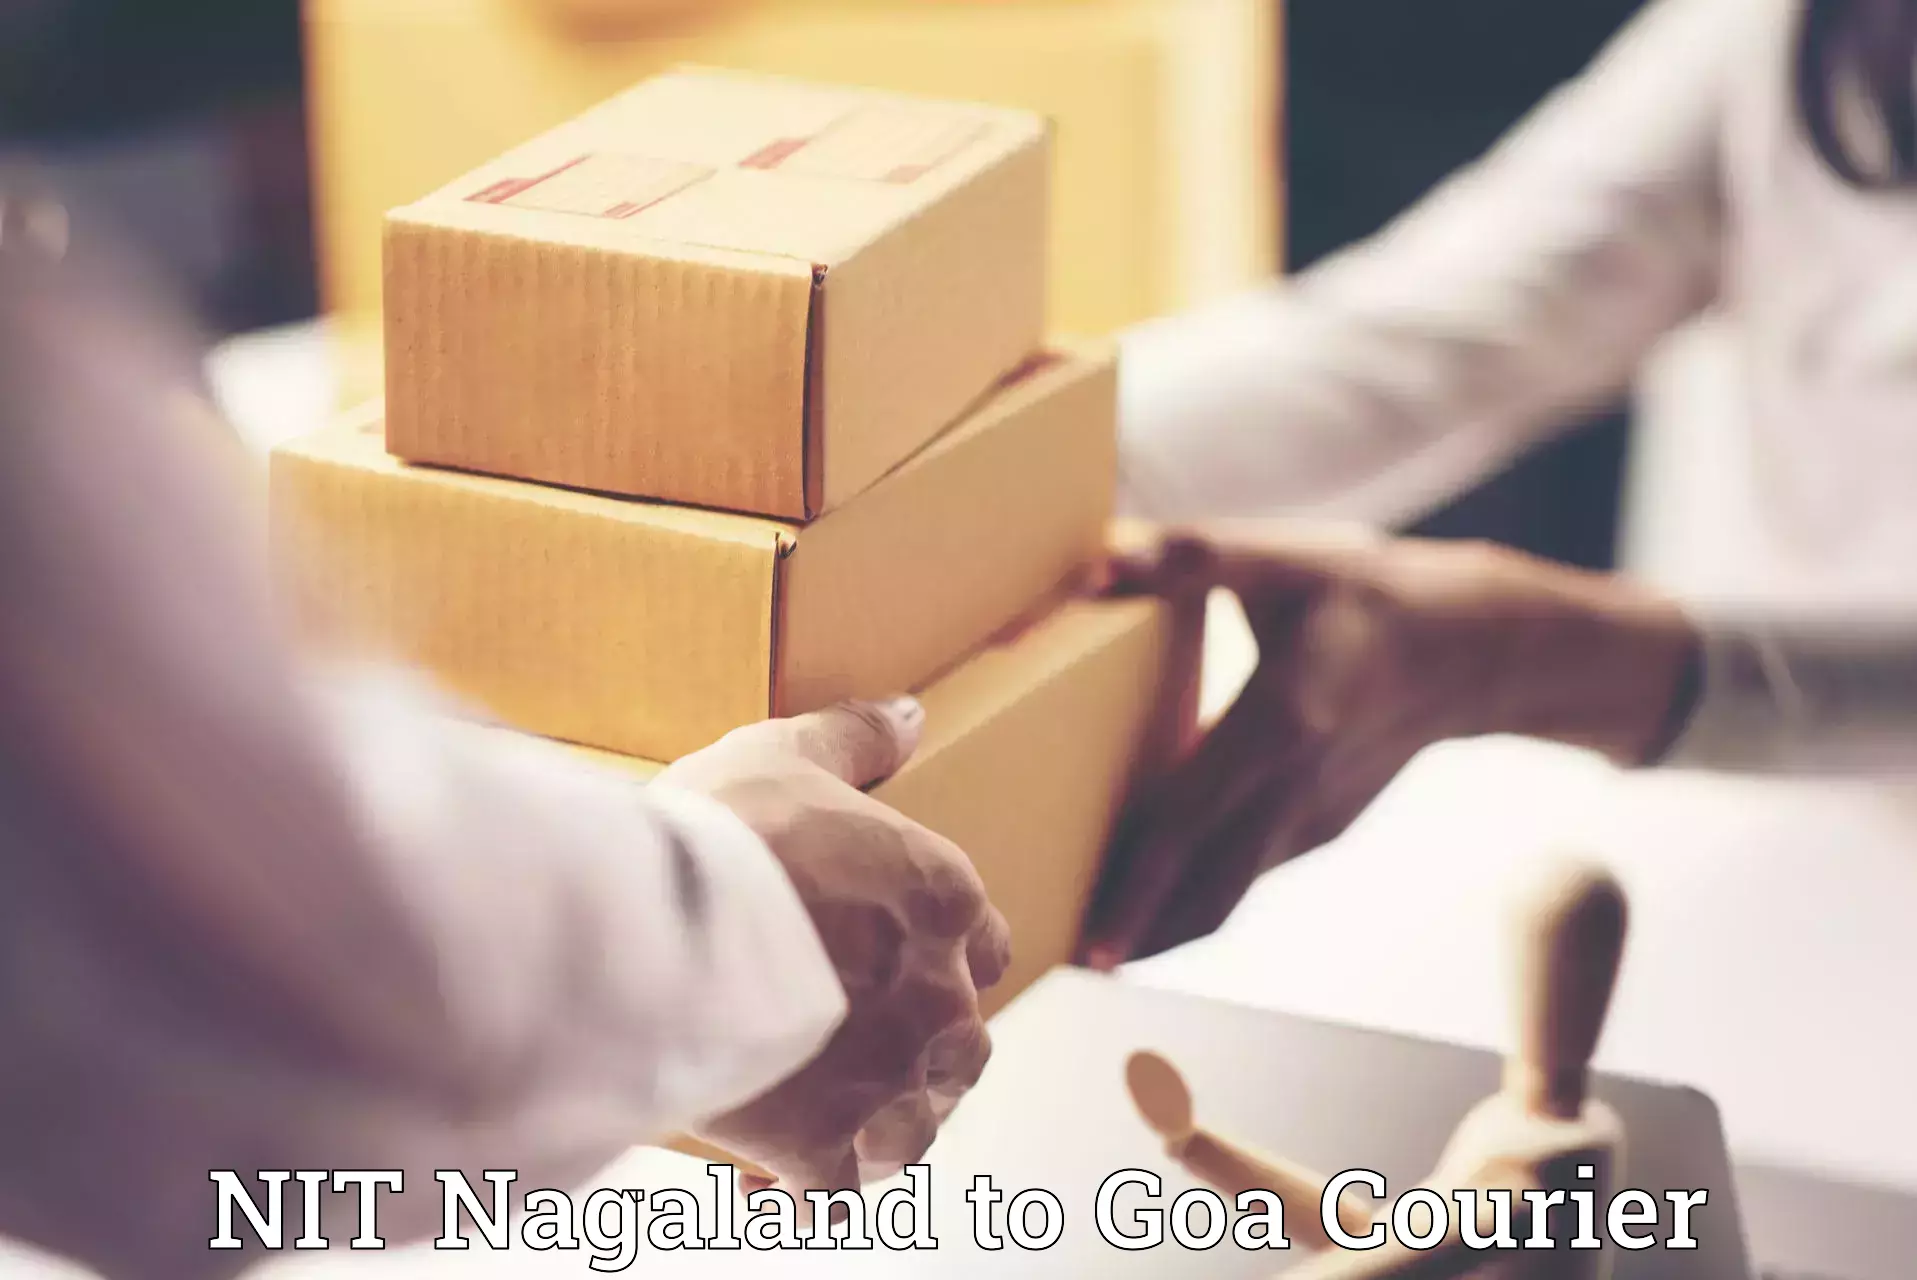 Furniture delivery service NIT Nagaland to Goa